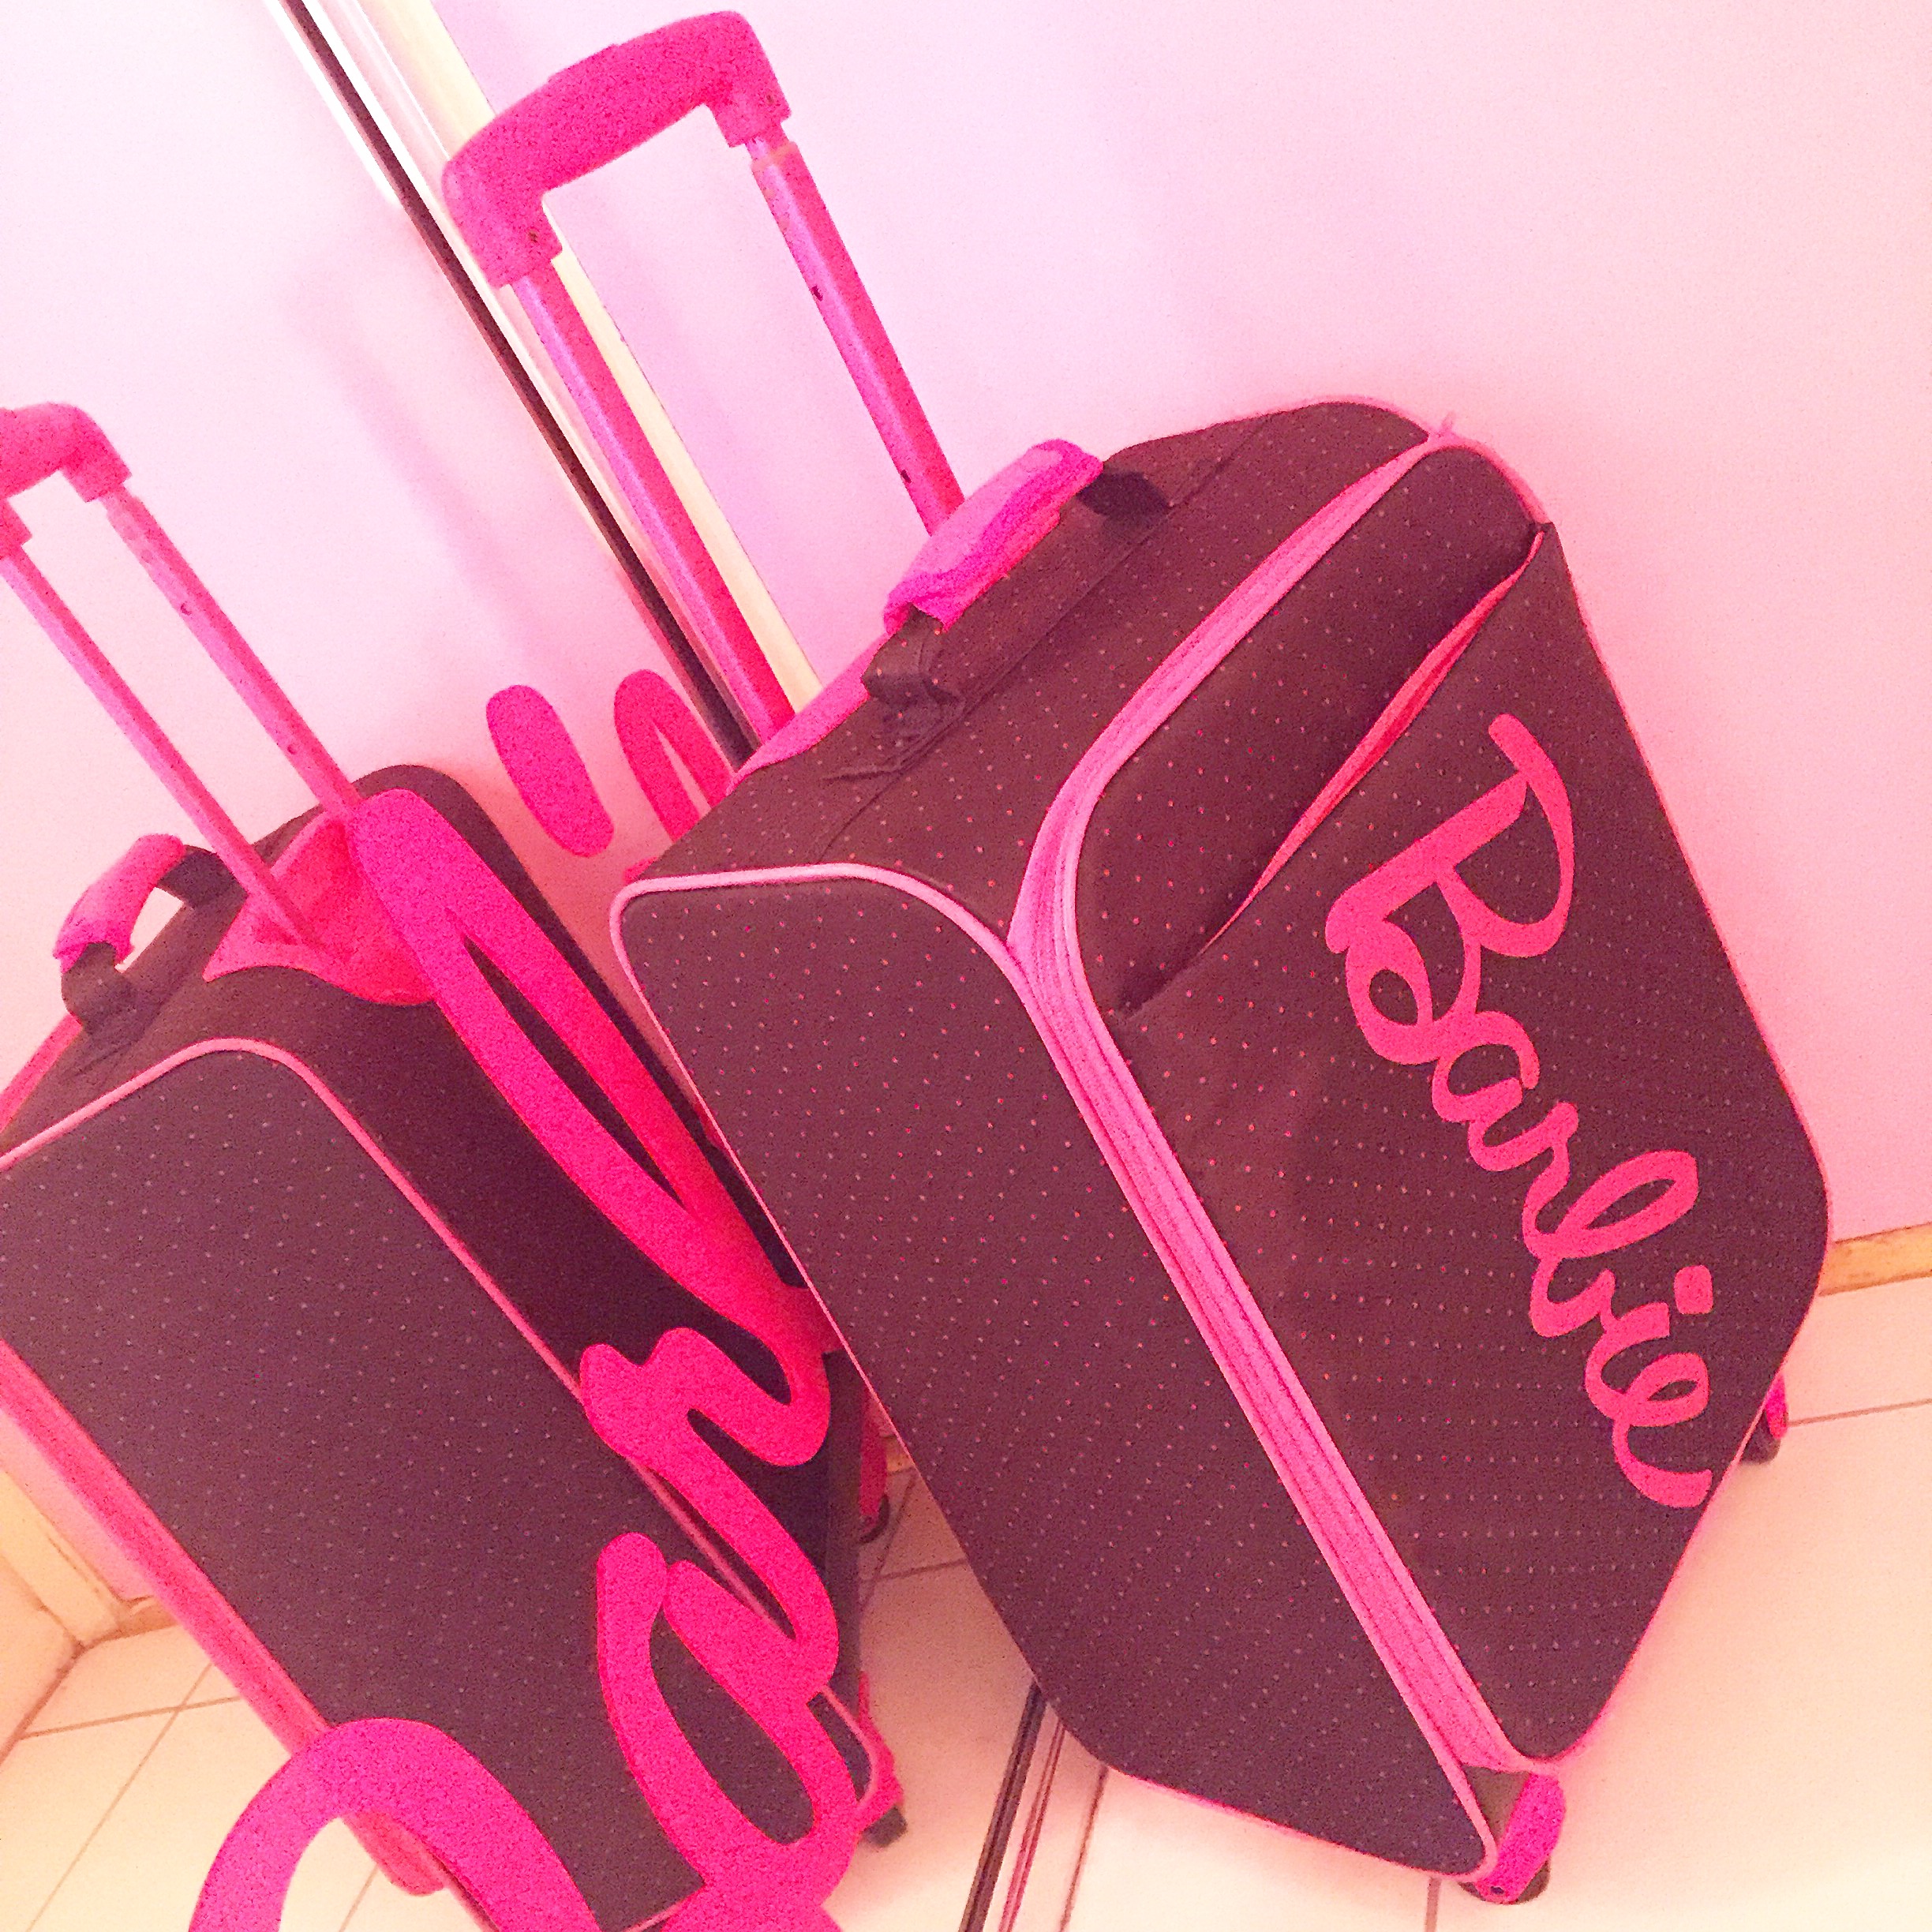 barbie with a suitcase